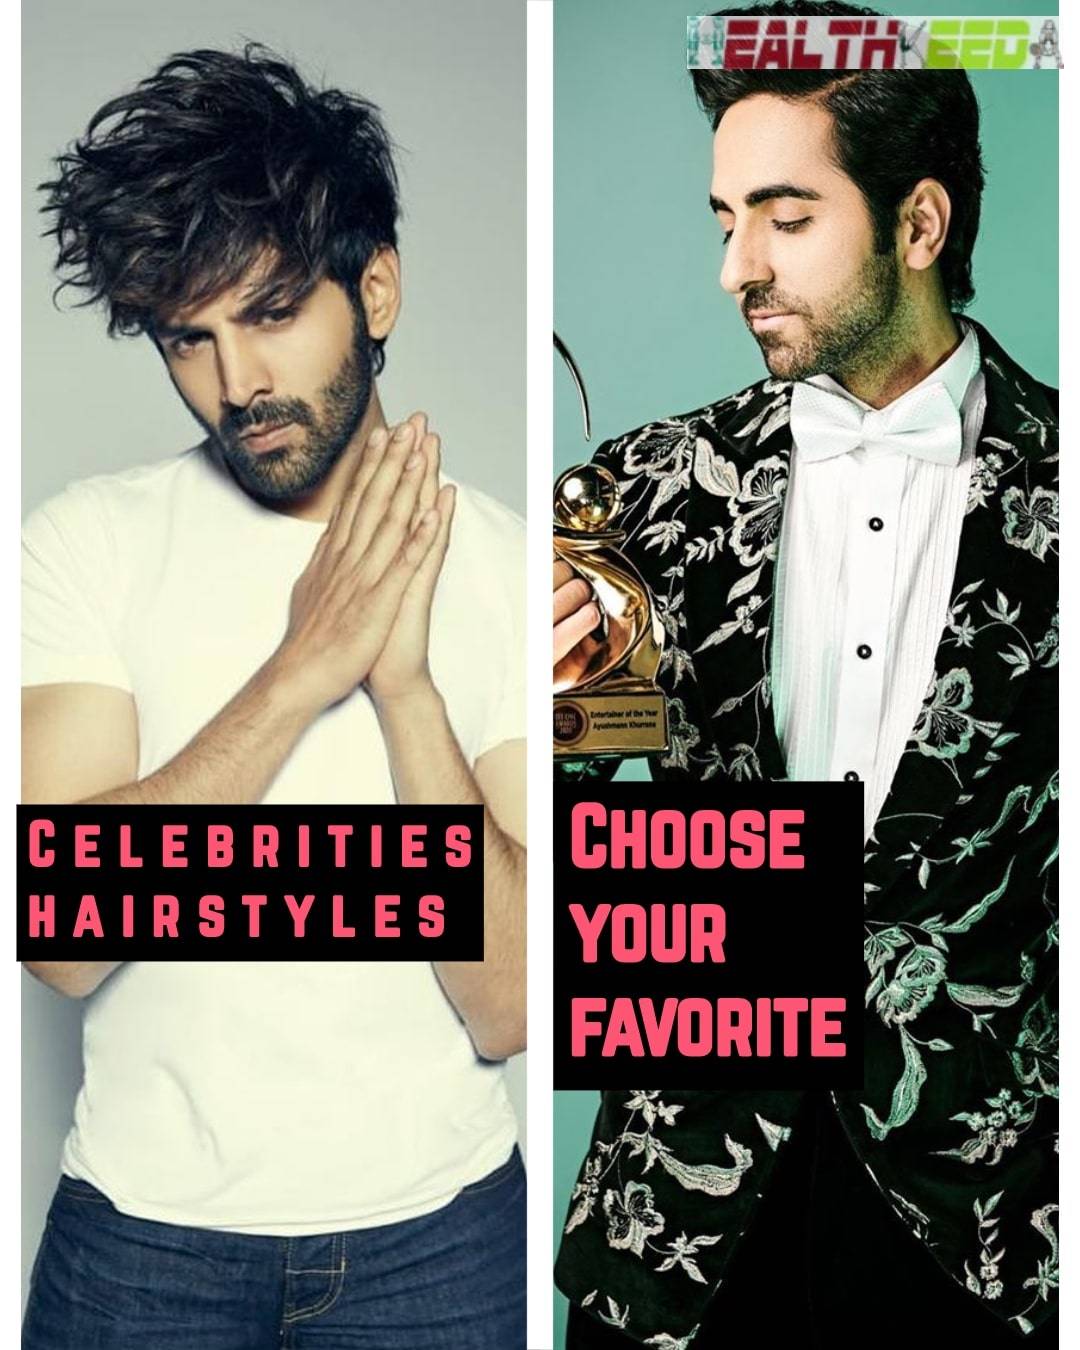 Indian Celebrities Hairstyles 2020 - Find the list of Celebrities here having great hairstyle for your inspiration